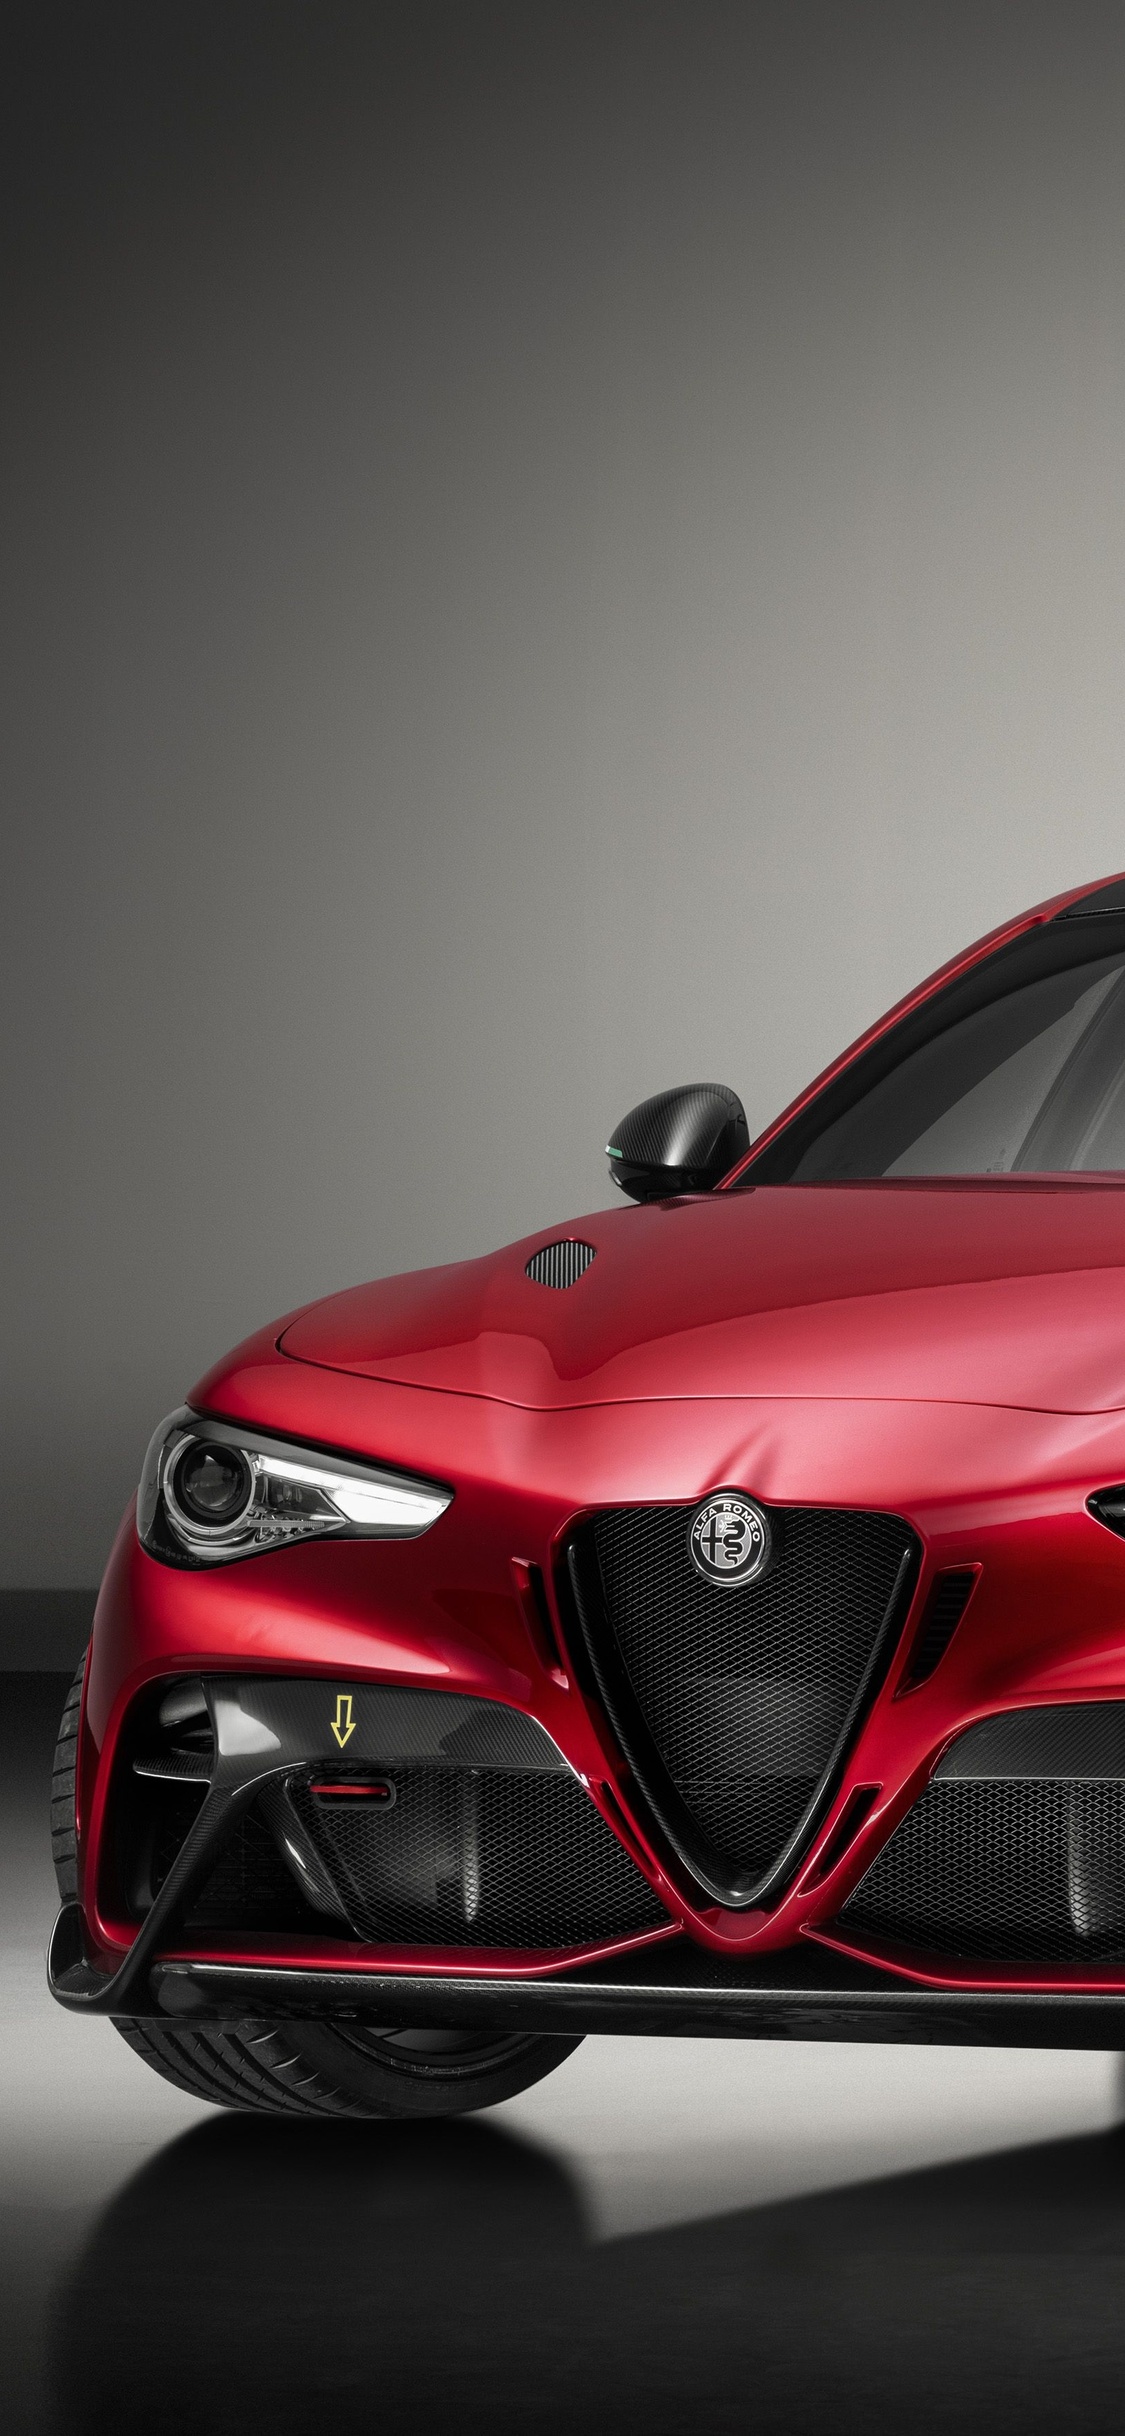 1125x2436 Alfa Romeo Giulia Quadrifoglio Iphone Xs Iphone 10 Iphone X Hd 4k Wallpapers Images Backgrounds Photos And Pictures